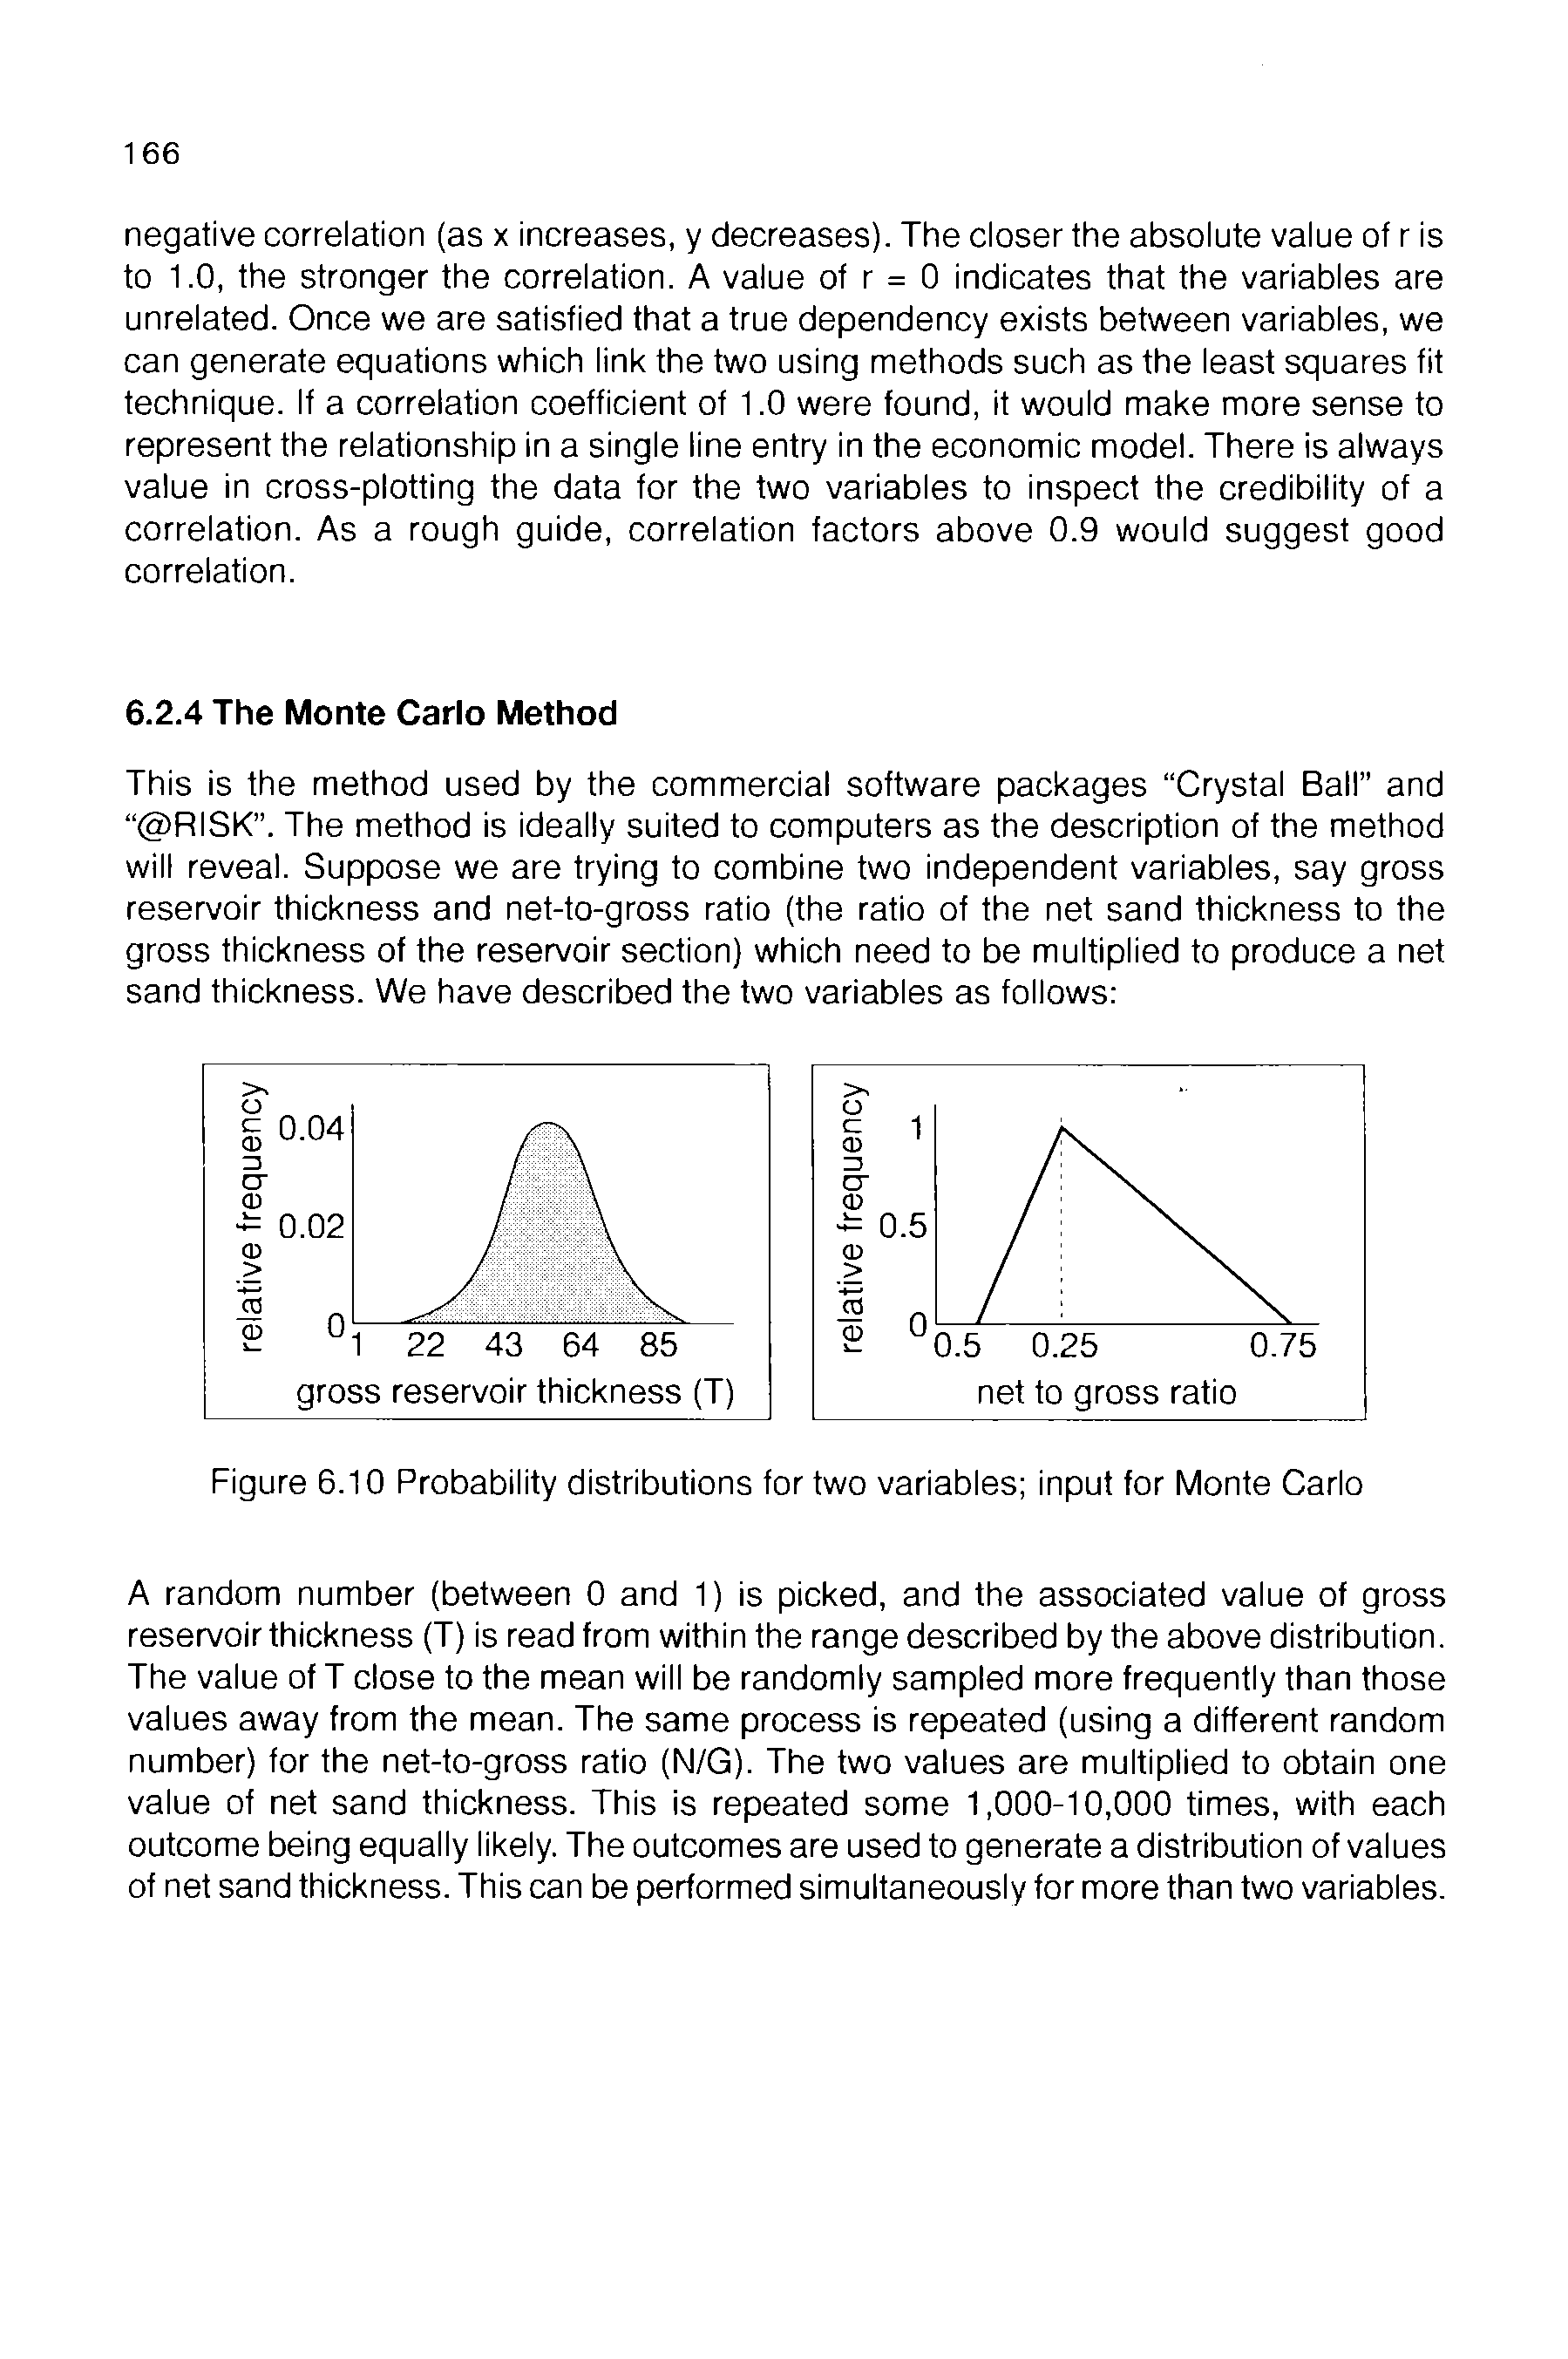 Figure 6.10 Probability distributions for two variables input for Monte Carlo...